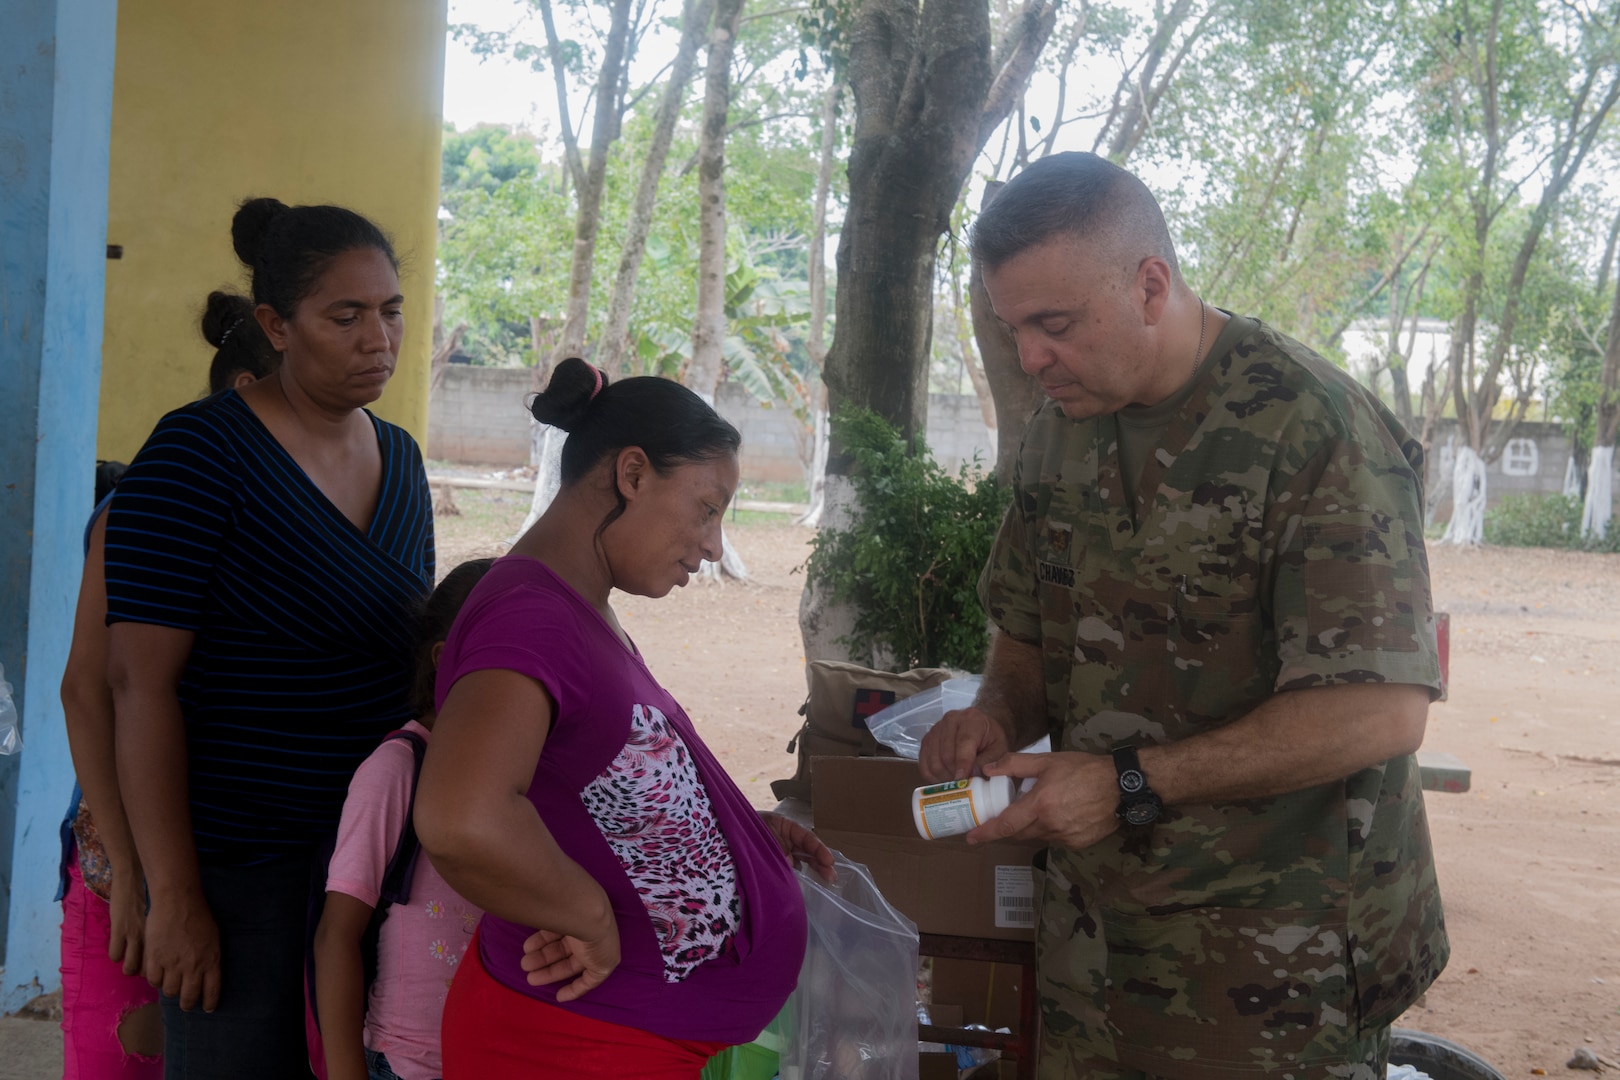 U.S. Army Maj. Jorge Chavez, Joint Task Force Bravo Medical Element public health nurse, provides instructions for pre-natal vitamins after a preventive medicine brief during a Medical Readiness Training Exercise (MEDRETE), May 10, 2019, in El Paraiso, Honduras. Members of JTF-B partnered with the Honduran Military and Ministry of Health to provide health care services for more than 1,300 Honduran citizens; reaching a third of the citizens in the towns of Argelia, Santa Maria and Las Dificultades in the El Paraiso Department. The goal of the mission was to provide the medical staff training in their areas of expertise as well as strengthen partnerships with the Honduran allies. (U.S. Air Force photo by Staff Sgt. Eric Summers Jr.)